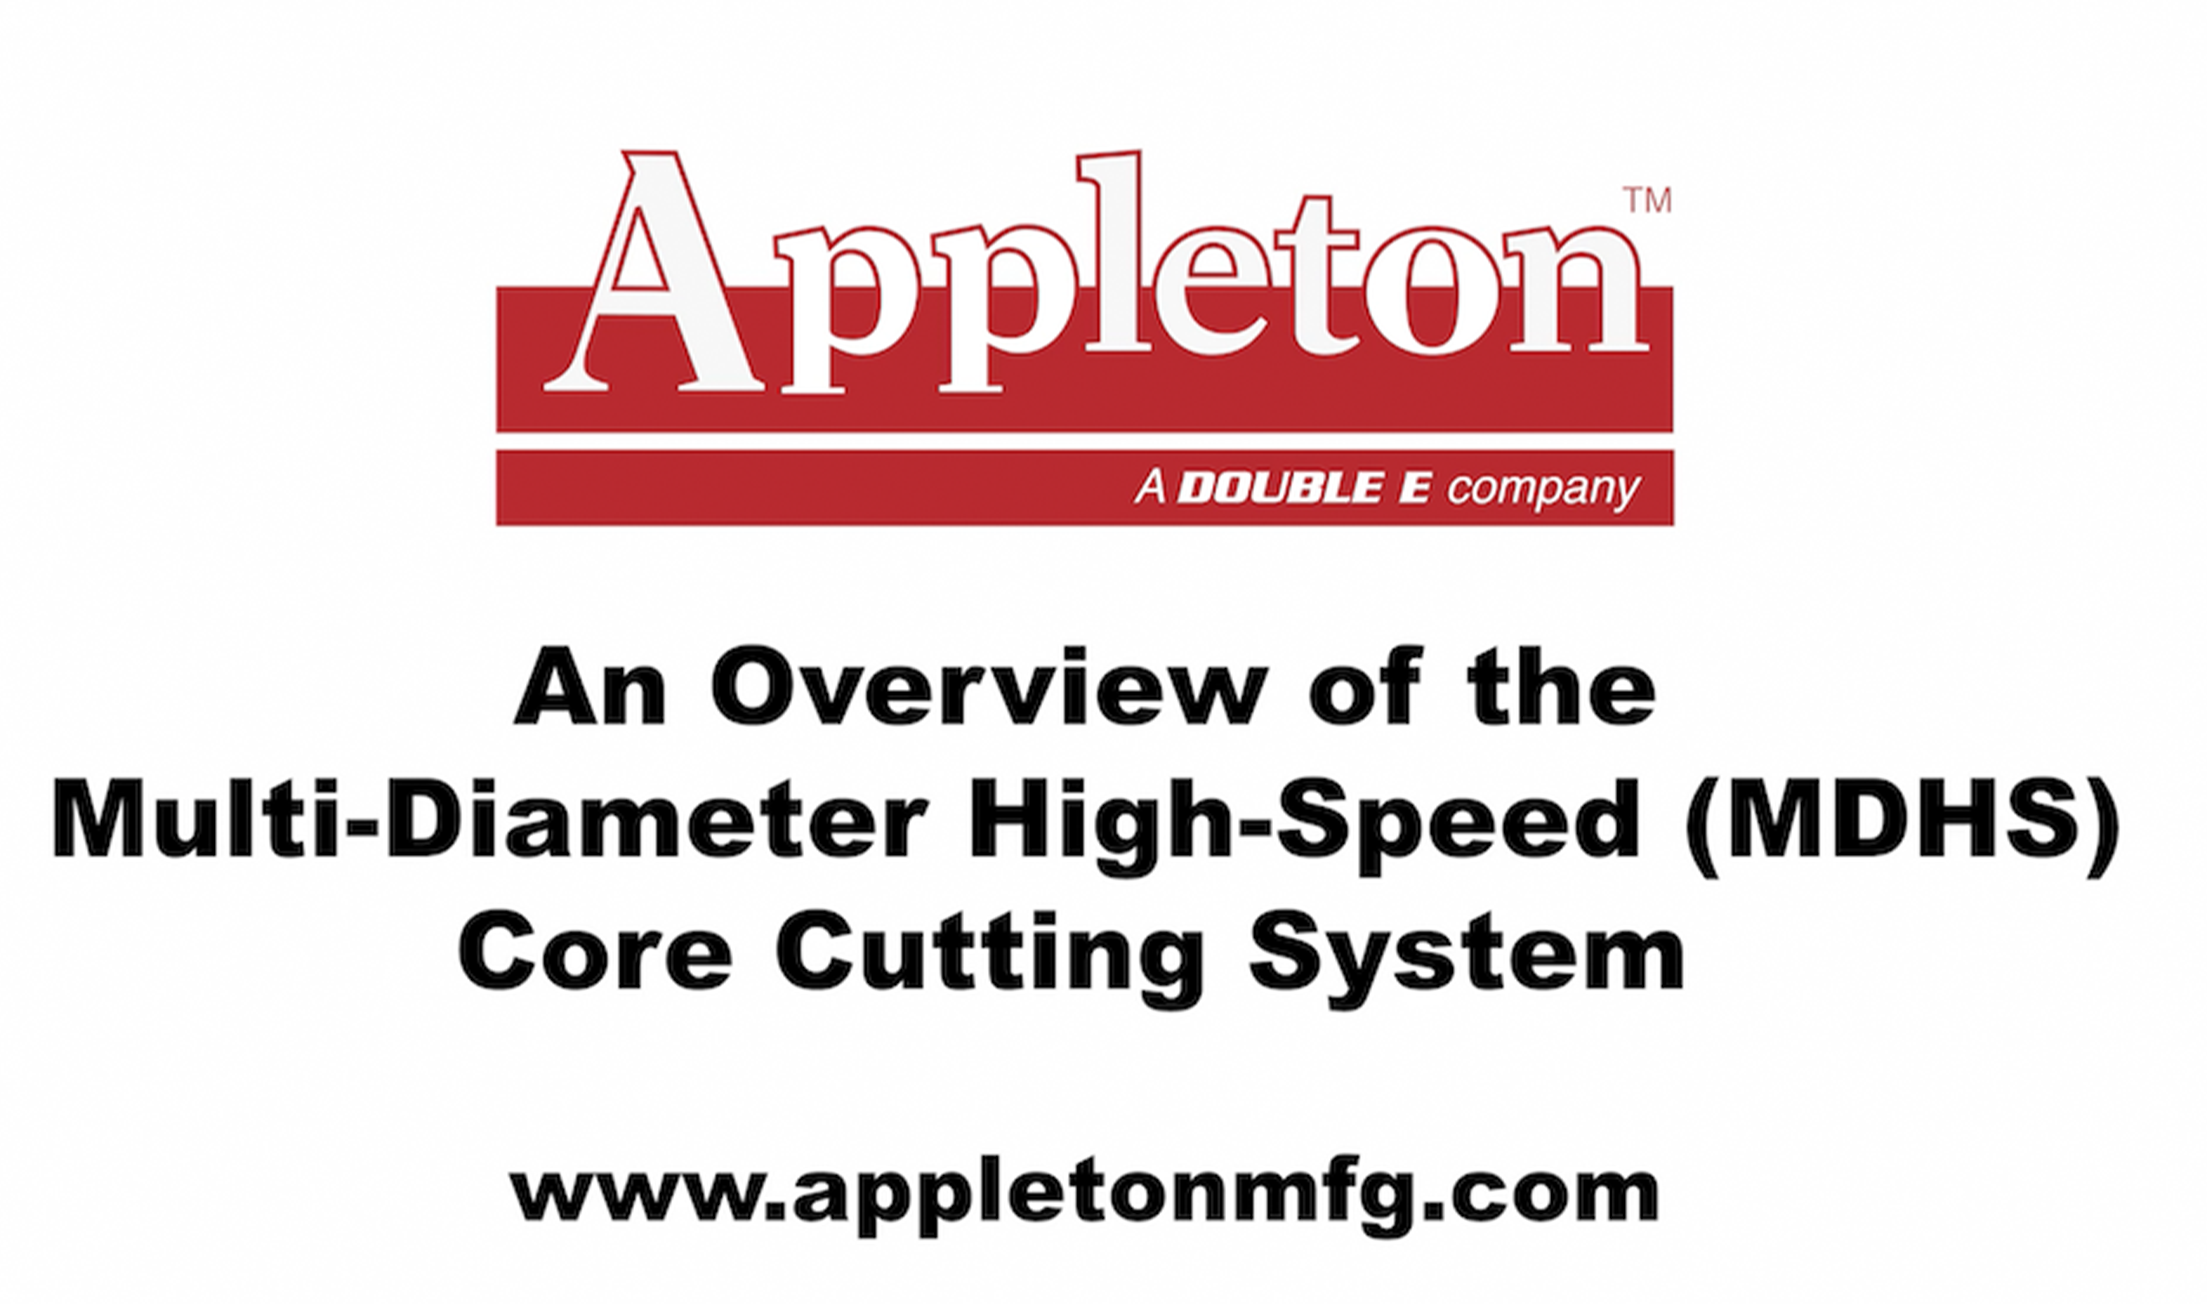 Appleton MDHS Core Cutter Overview